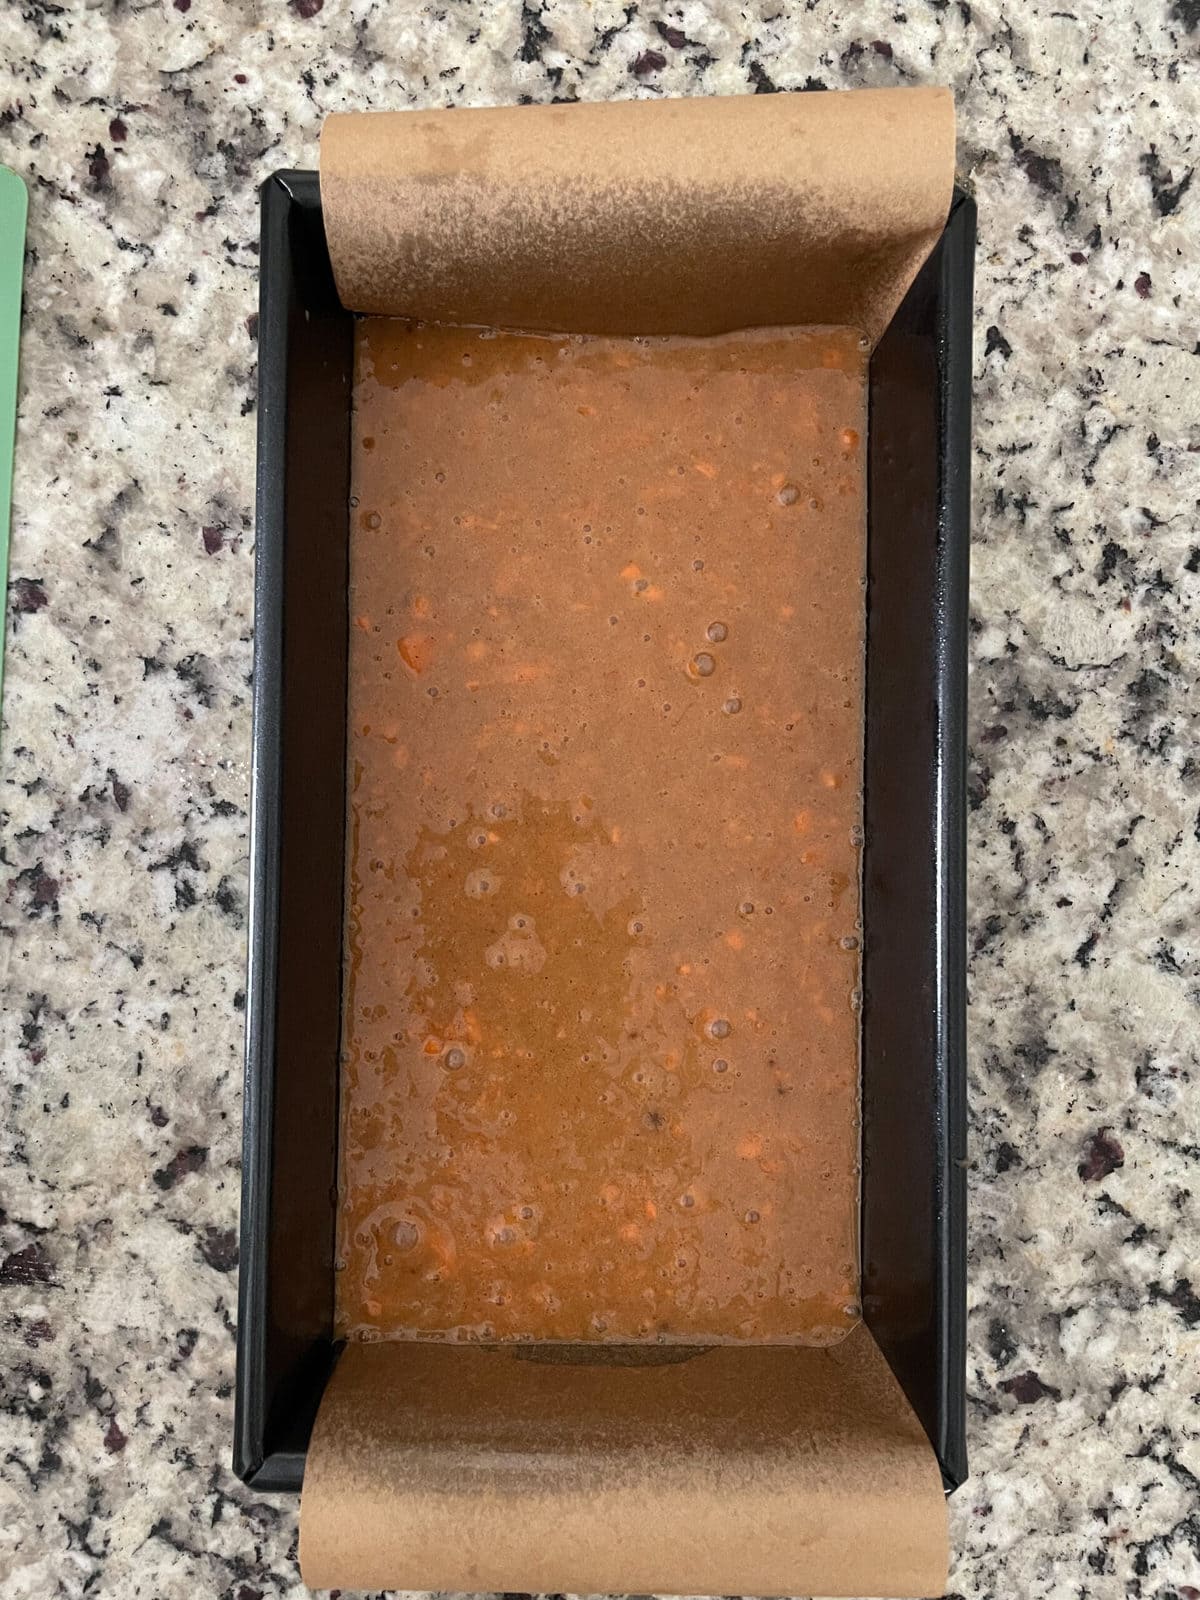 carrot cake batter in a loaf pan